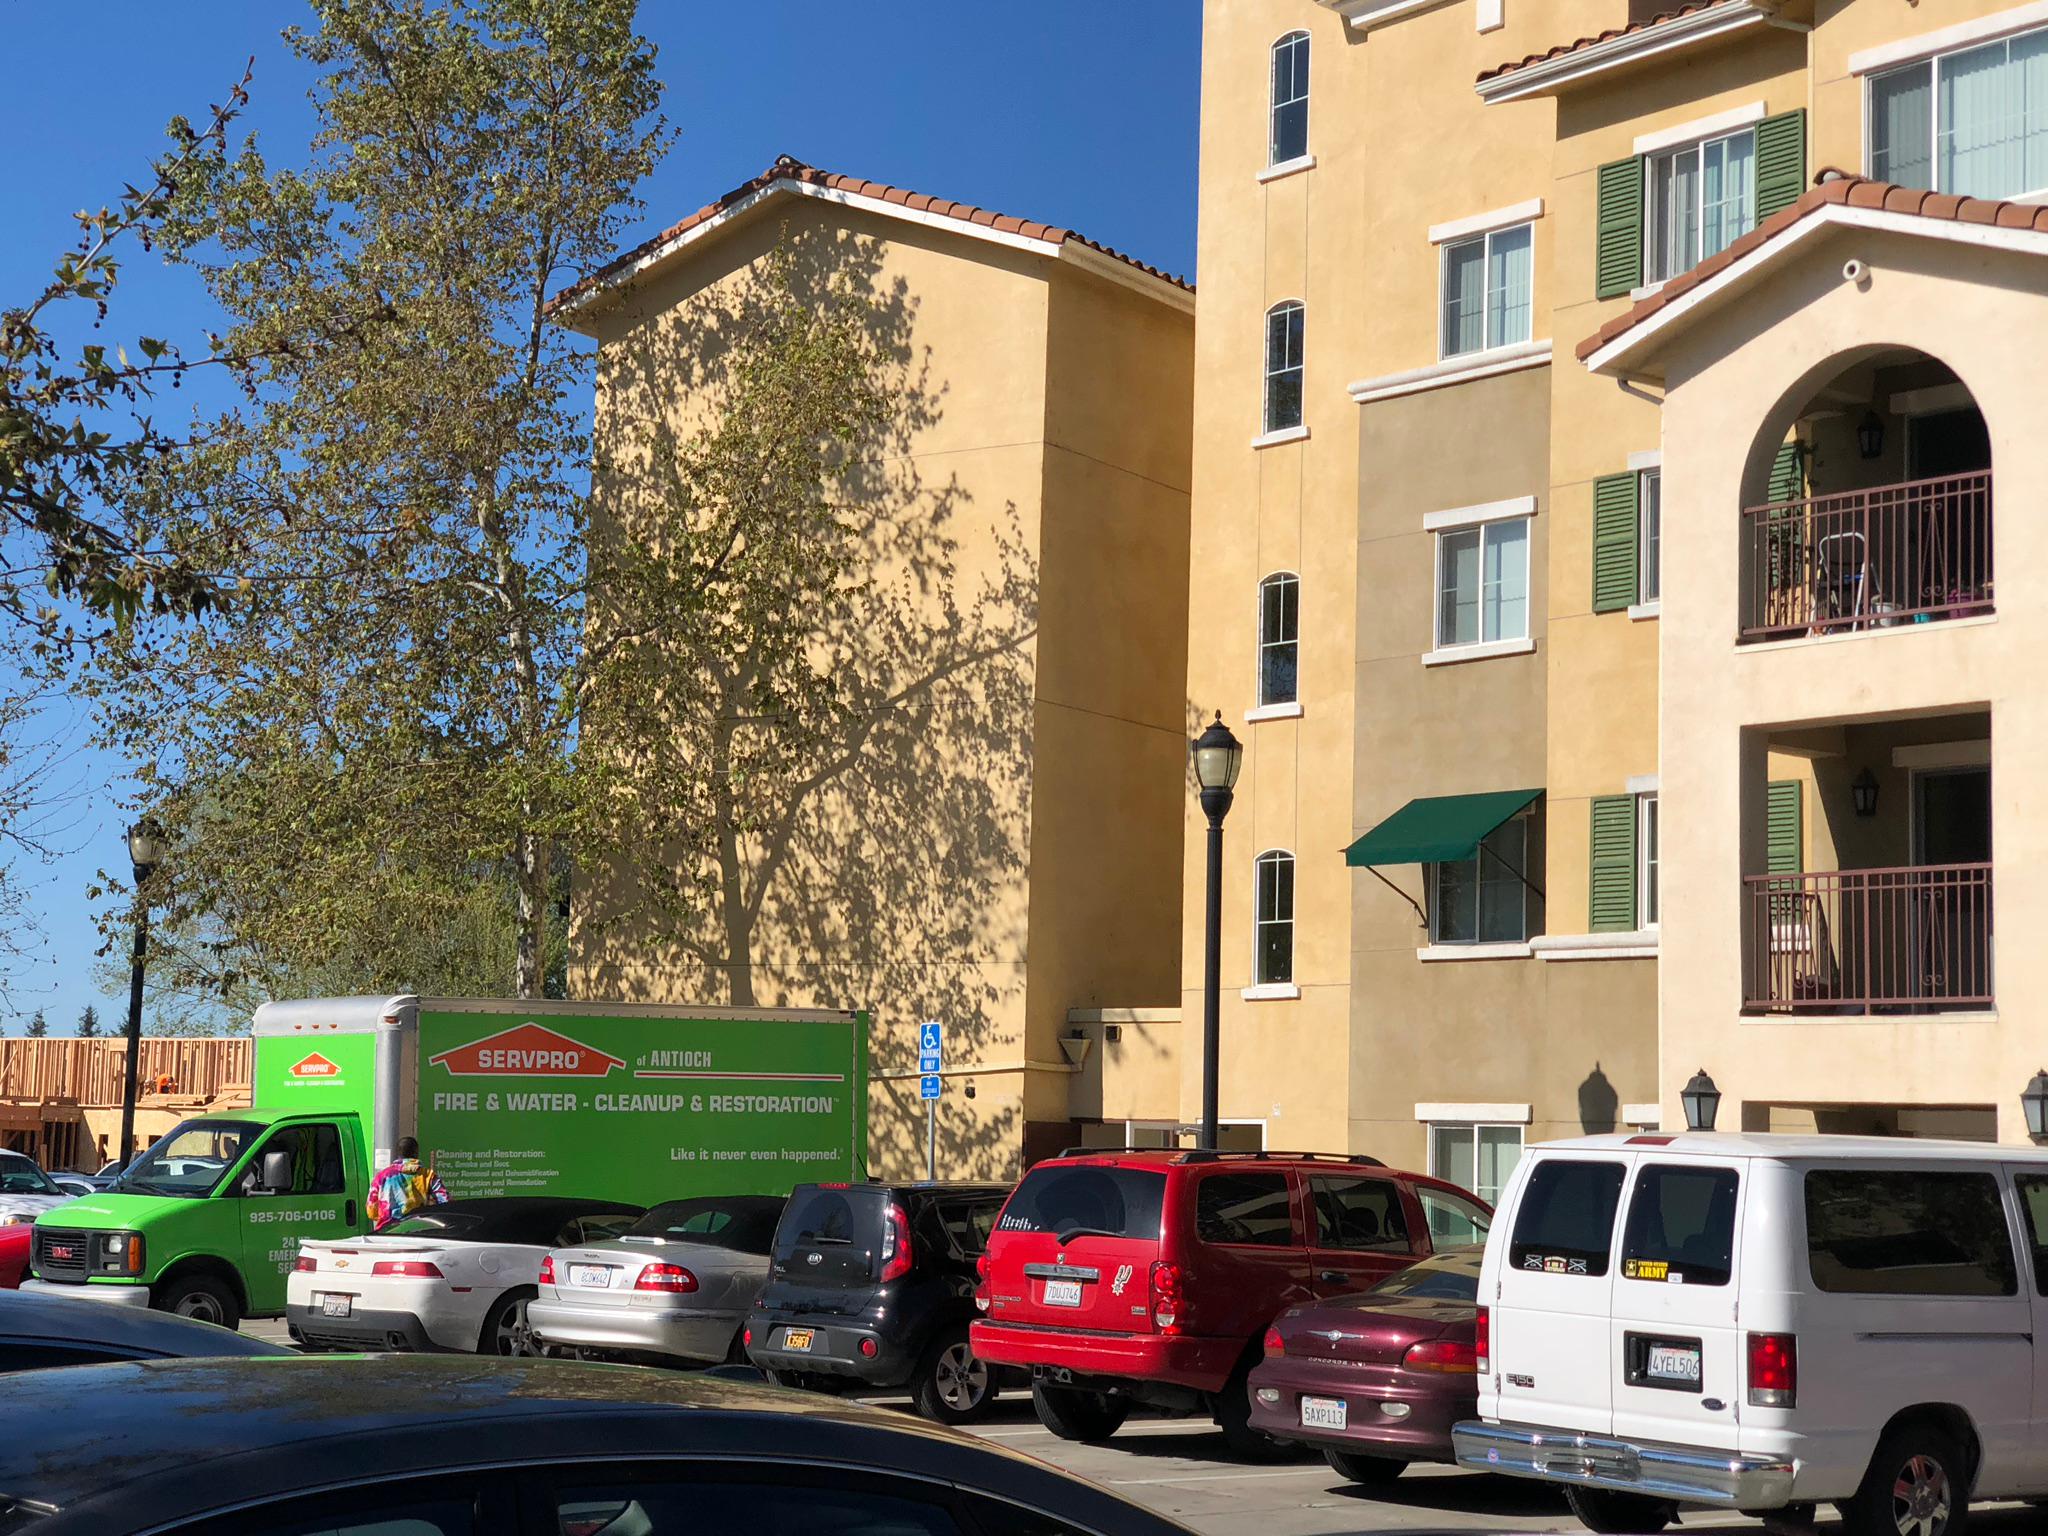 SERVPRO of Antioch does Commercial Mitigation and Restoration